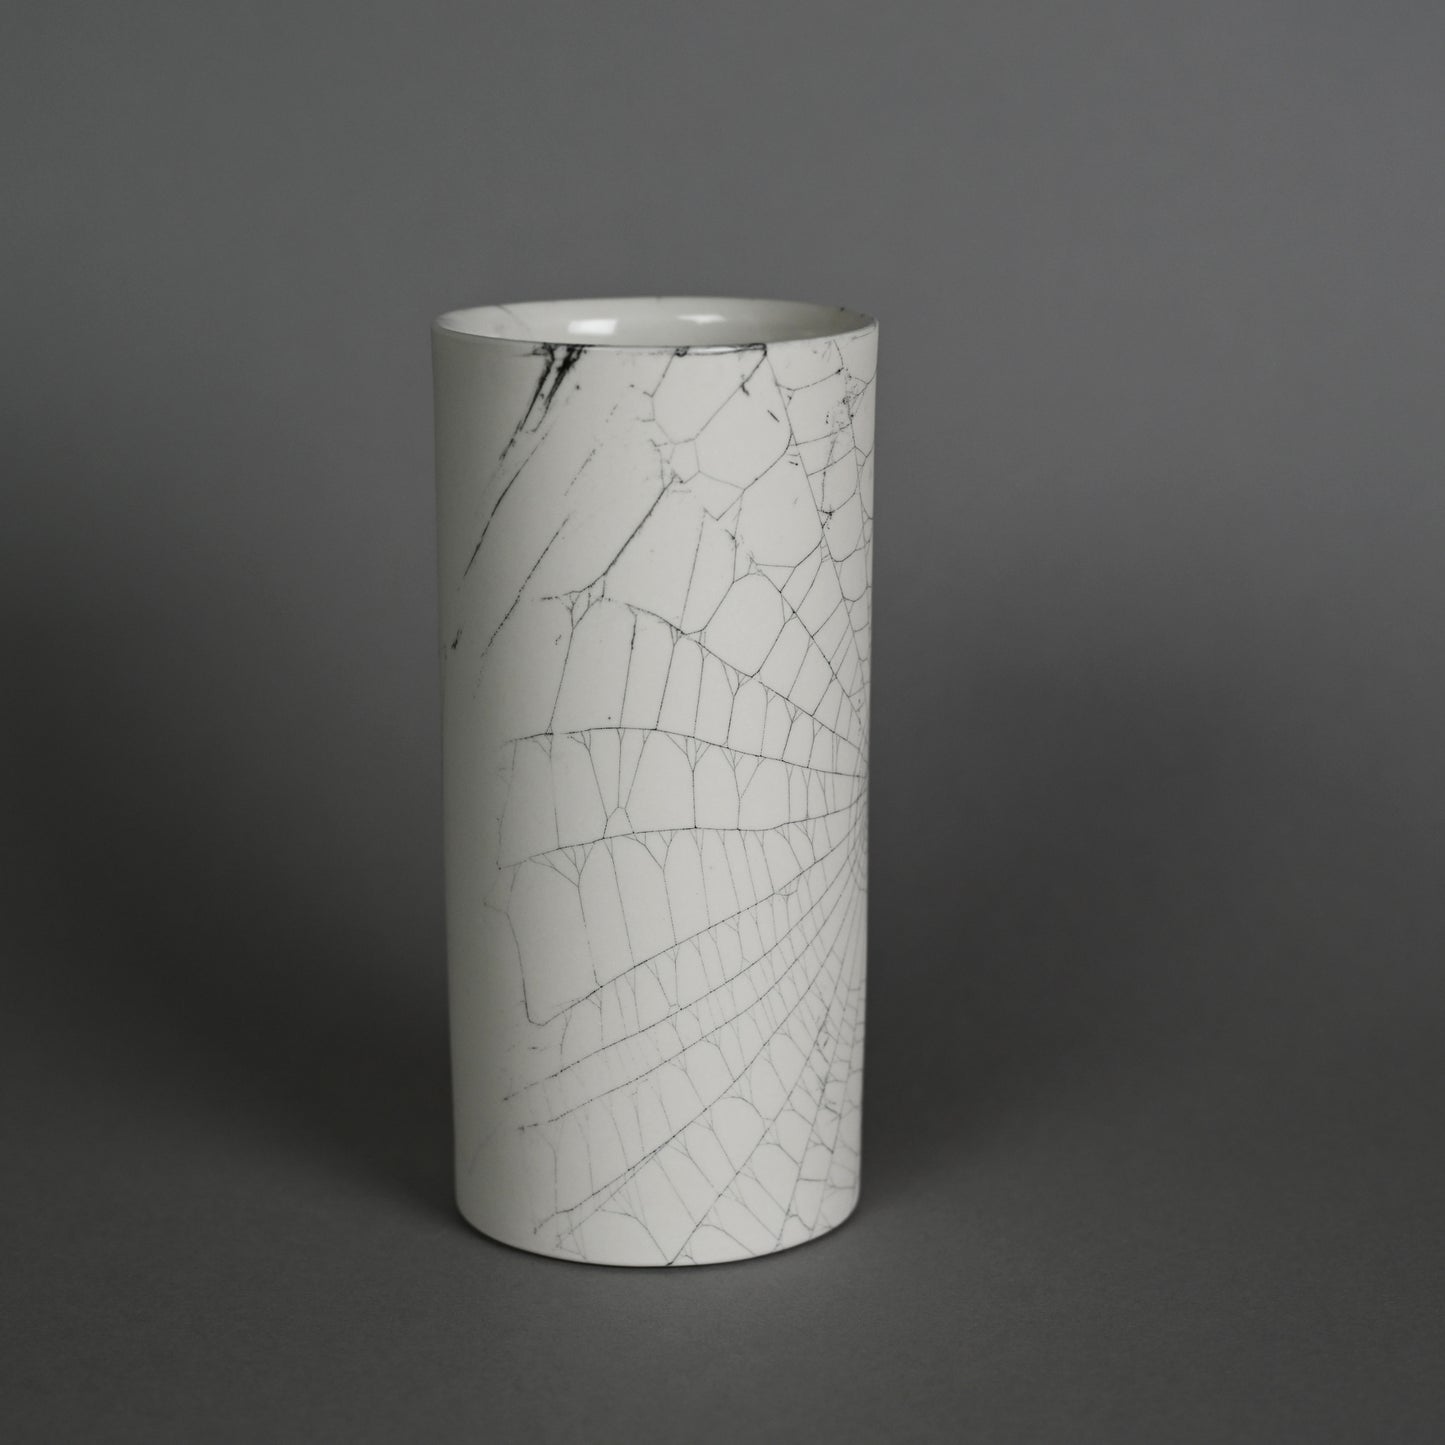 Web on Clay (188), Collected September 24, 2022